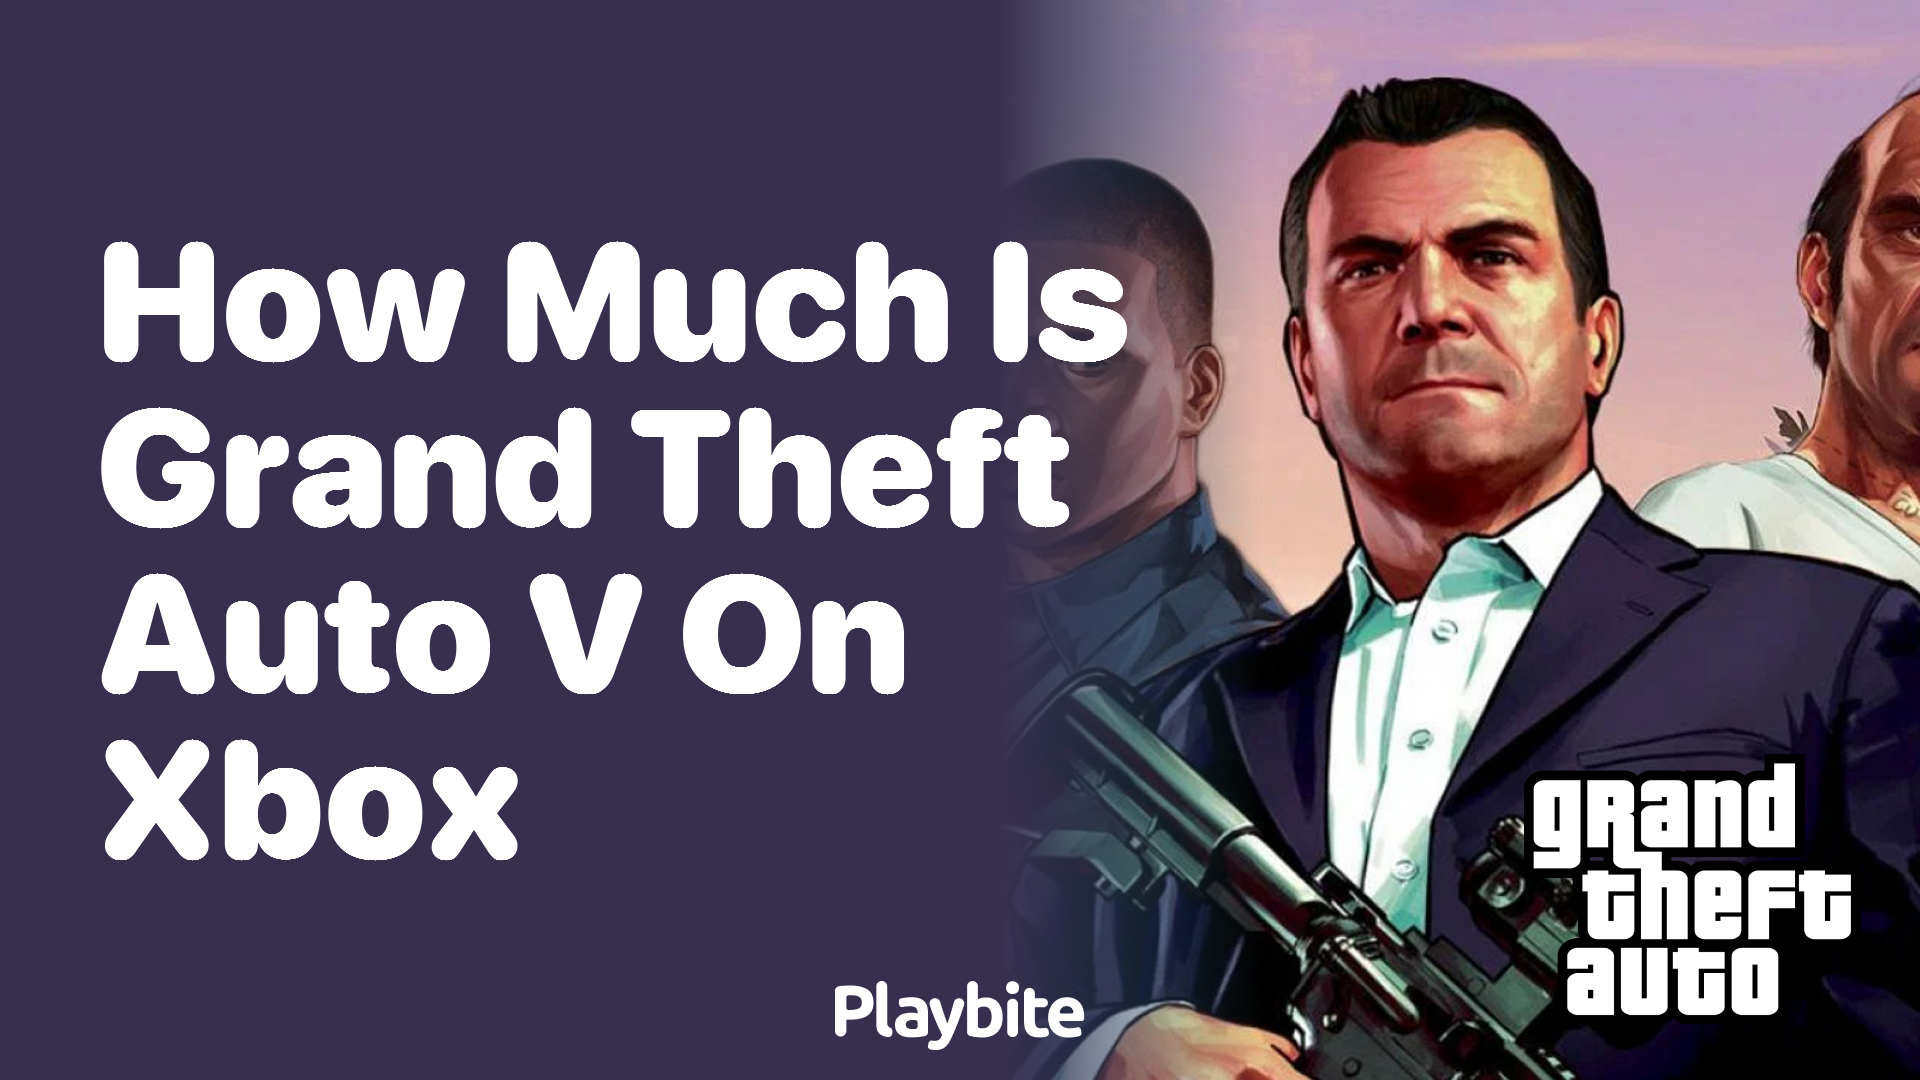 How much does Grand Theft Auto V cost on Xbox?